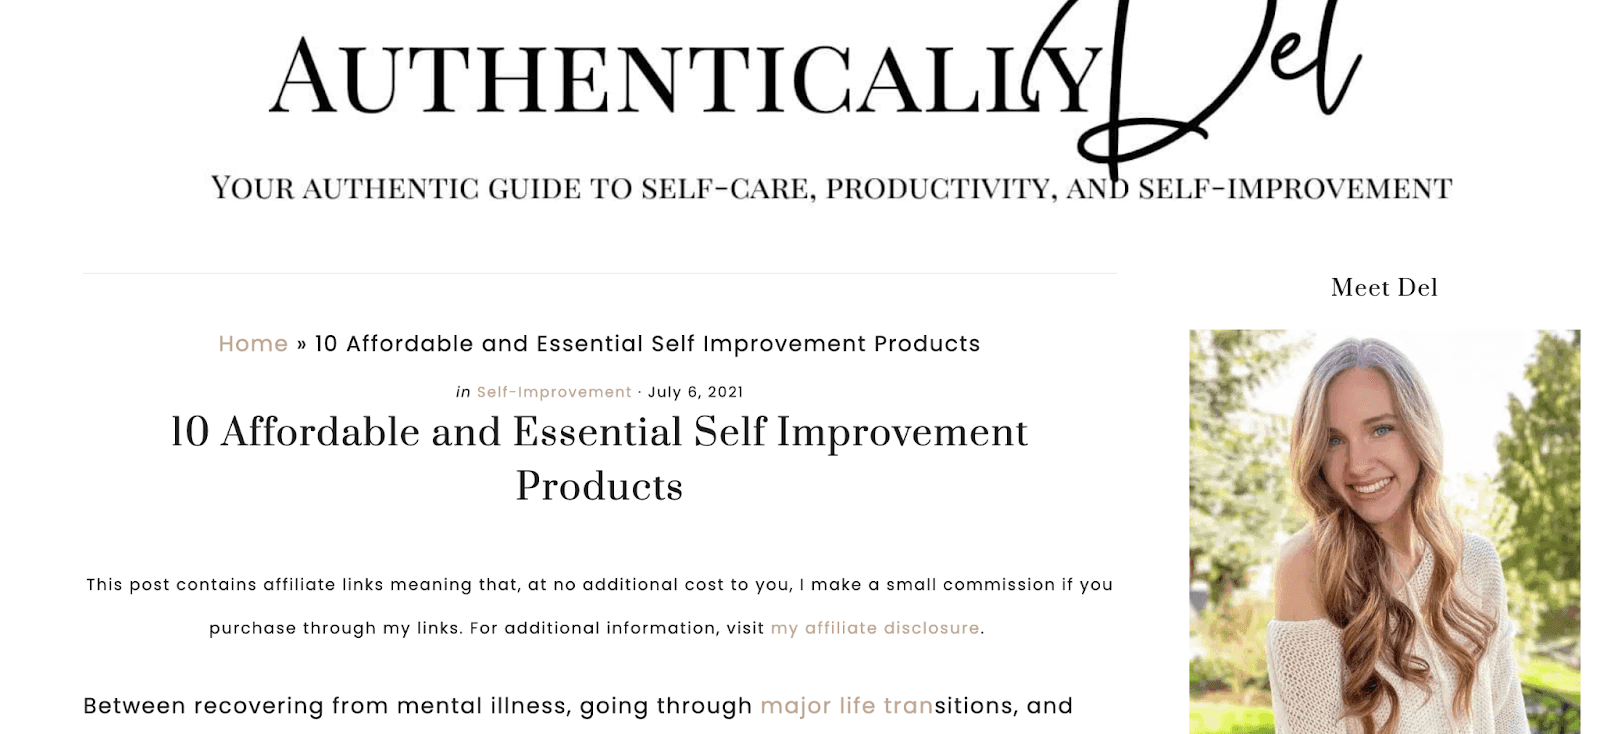 Authentically affordable and essential self improvement products